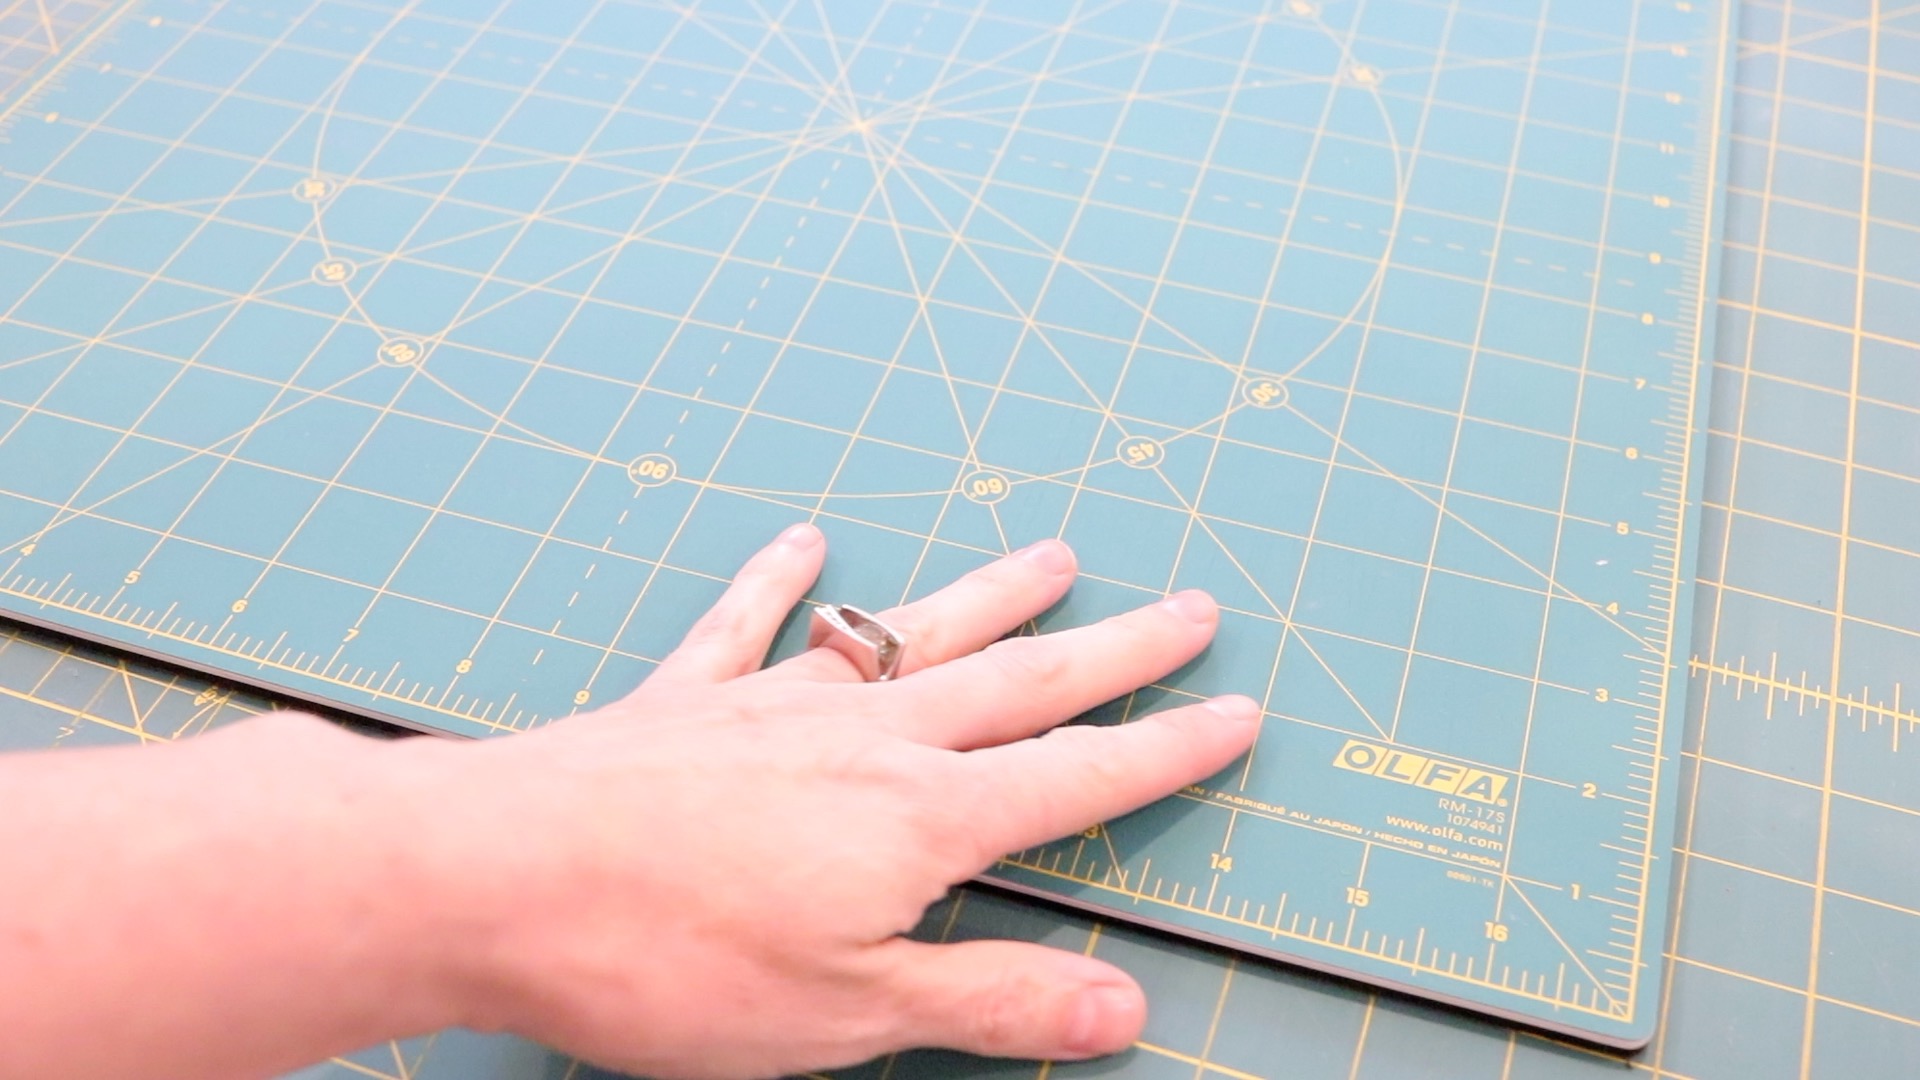 A hand resting onto of a forest green Olfa cutting mat. The mat has visible yellow grid lines for cutting fabric.